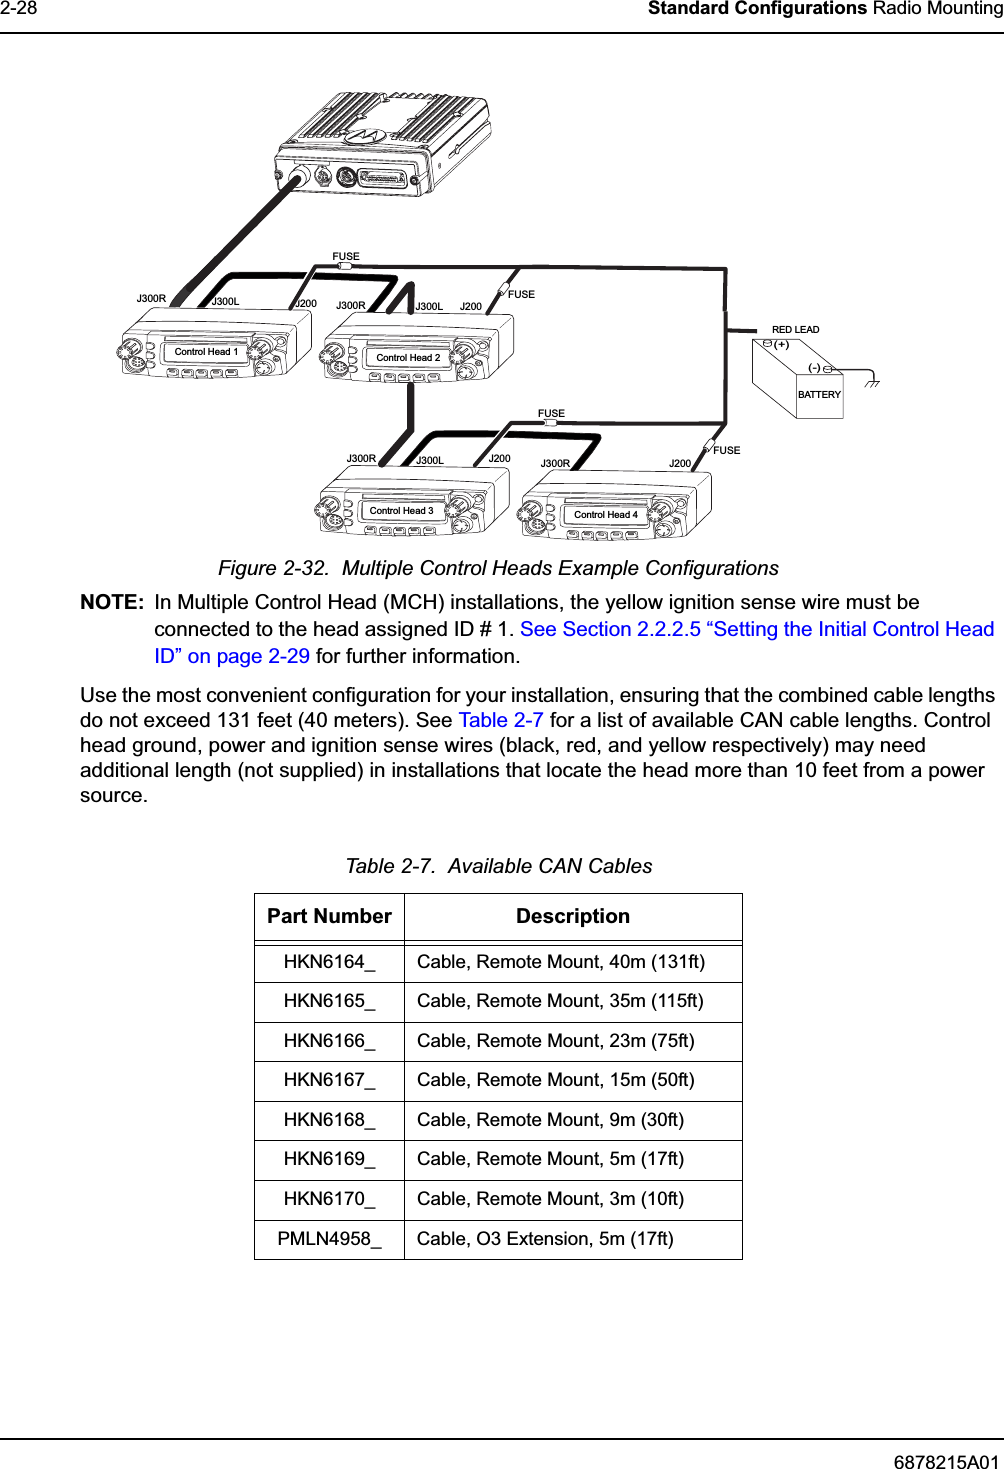 6878215A012-28 Standard Configurations Radio MountingFigure 2-32.  Multiple Control Heads Example ConfigurationsNOTE: In Multiple Control Head (MCH) installations, the yellow ignition sense wire must be connected to the head assigned ID # 1. See Section 2.2.2.5 “Setting the Initial Control Head ID” on page 2-29 for further information.Use the most convenient configuration for your installation, ensuring that the combined cable lengths do not exceed 131 feet (40 meters). See Table 2-7 for a list of available CAN cable lengths. Control head ground, power and ignition sense wires (black, red, and yellow respectively) may need additional length (not supplied) in installations that locate the head more than 10 feet from a power source.Table 2-7.  Available CAN CablesPart Number DescriptionHKN6164_ Cable, Remote Mount, 40m (131ft)HKN6165_ Cable, Remote Mount, 35m (115ft)HKN6166_ Cable, Remote Mount, 23m (75ft)HKN6167_ Cable, Remote Mount, 15m (50ft)HKN6168_ Cable, Remote Mount, 9m (30ft)HKN6169_ Cable, Remote Mount, 5m (17ft)HKN6170_ Cable, Remote Mount, 3m (10ft)PMLN4958_ Cable, O3 Extension, 5m (17ft)Control Head 1 Control Head 2J300R J300RJ200 J200J300L J300L(-)RED LEAD(+)BATTERYFUSEFUSEFUSEFUSEControl Head 3 Control Head 4J300RJ200 J200J300LJ300R